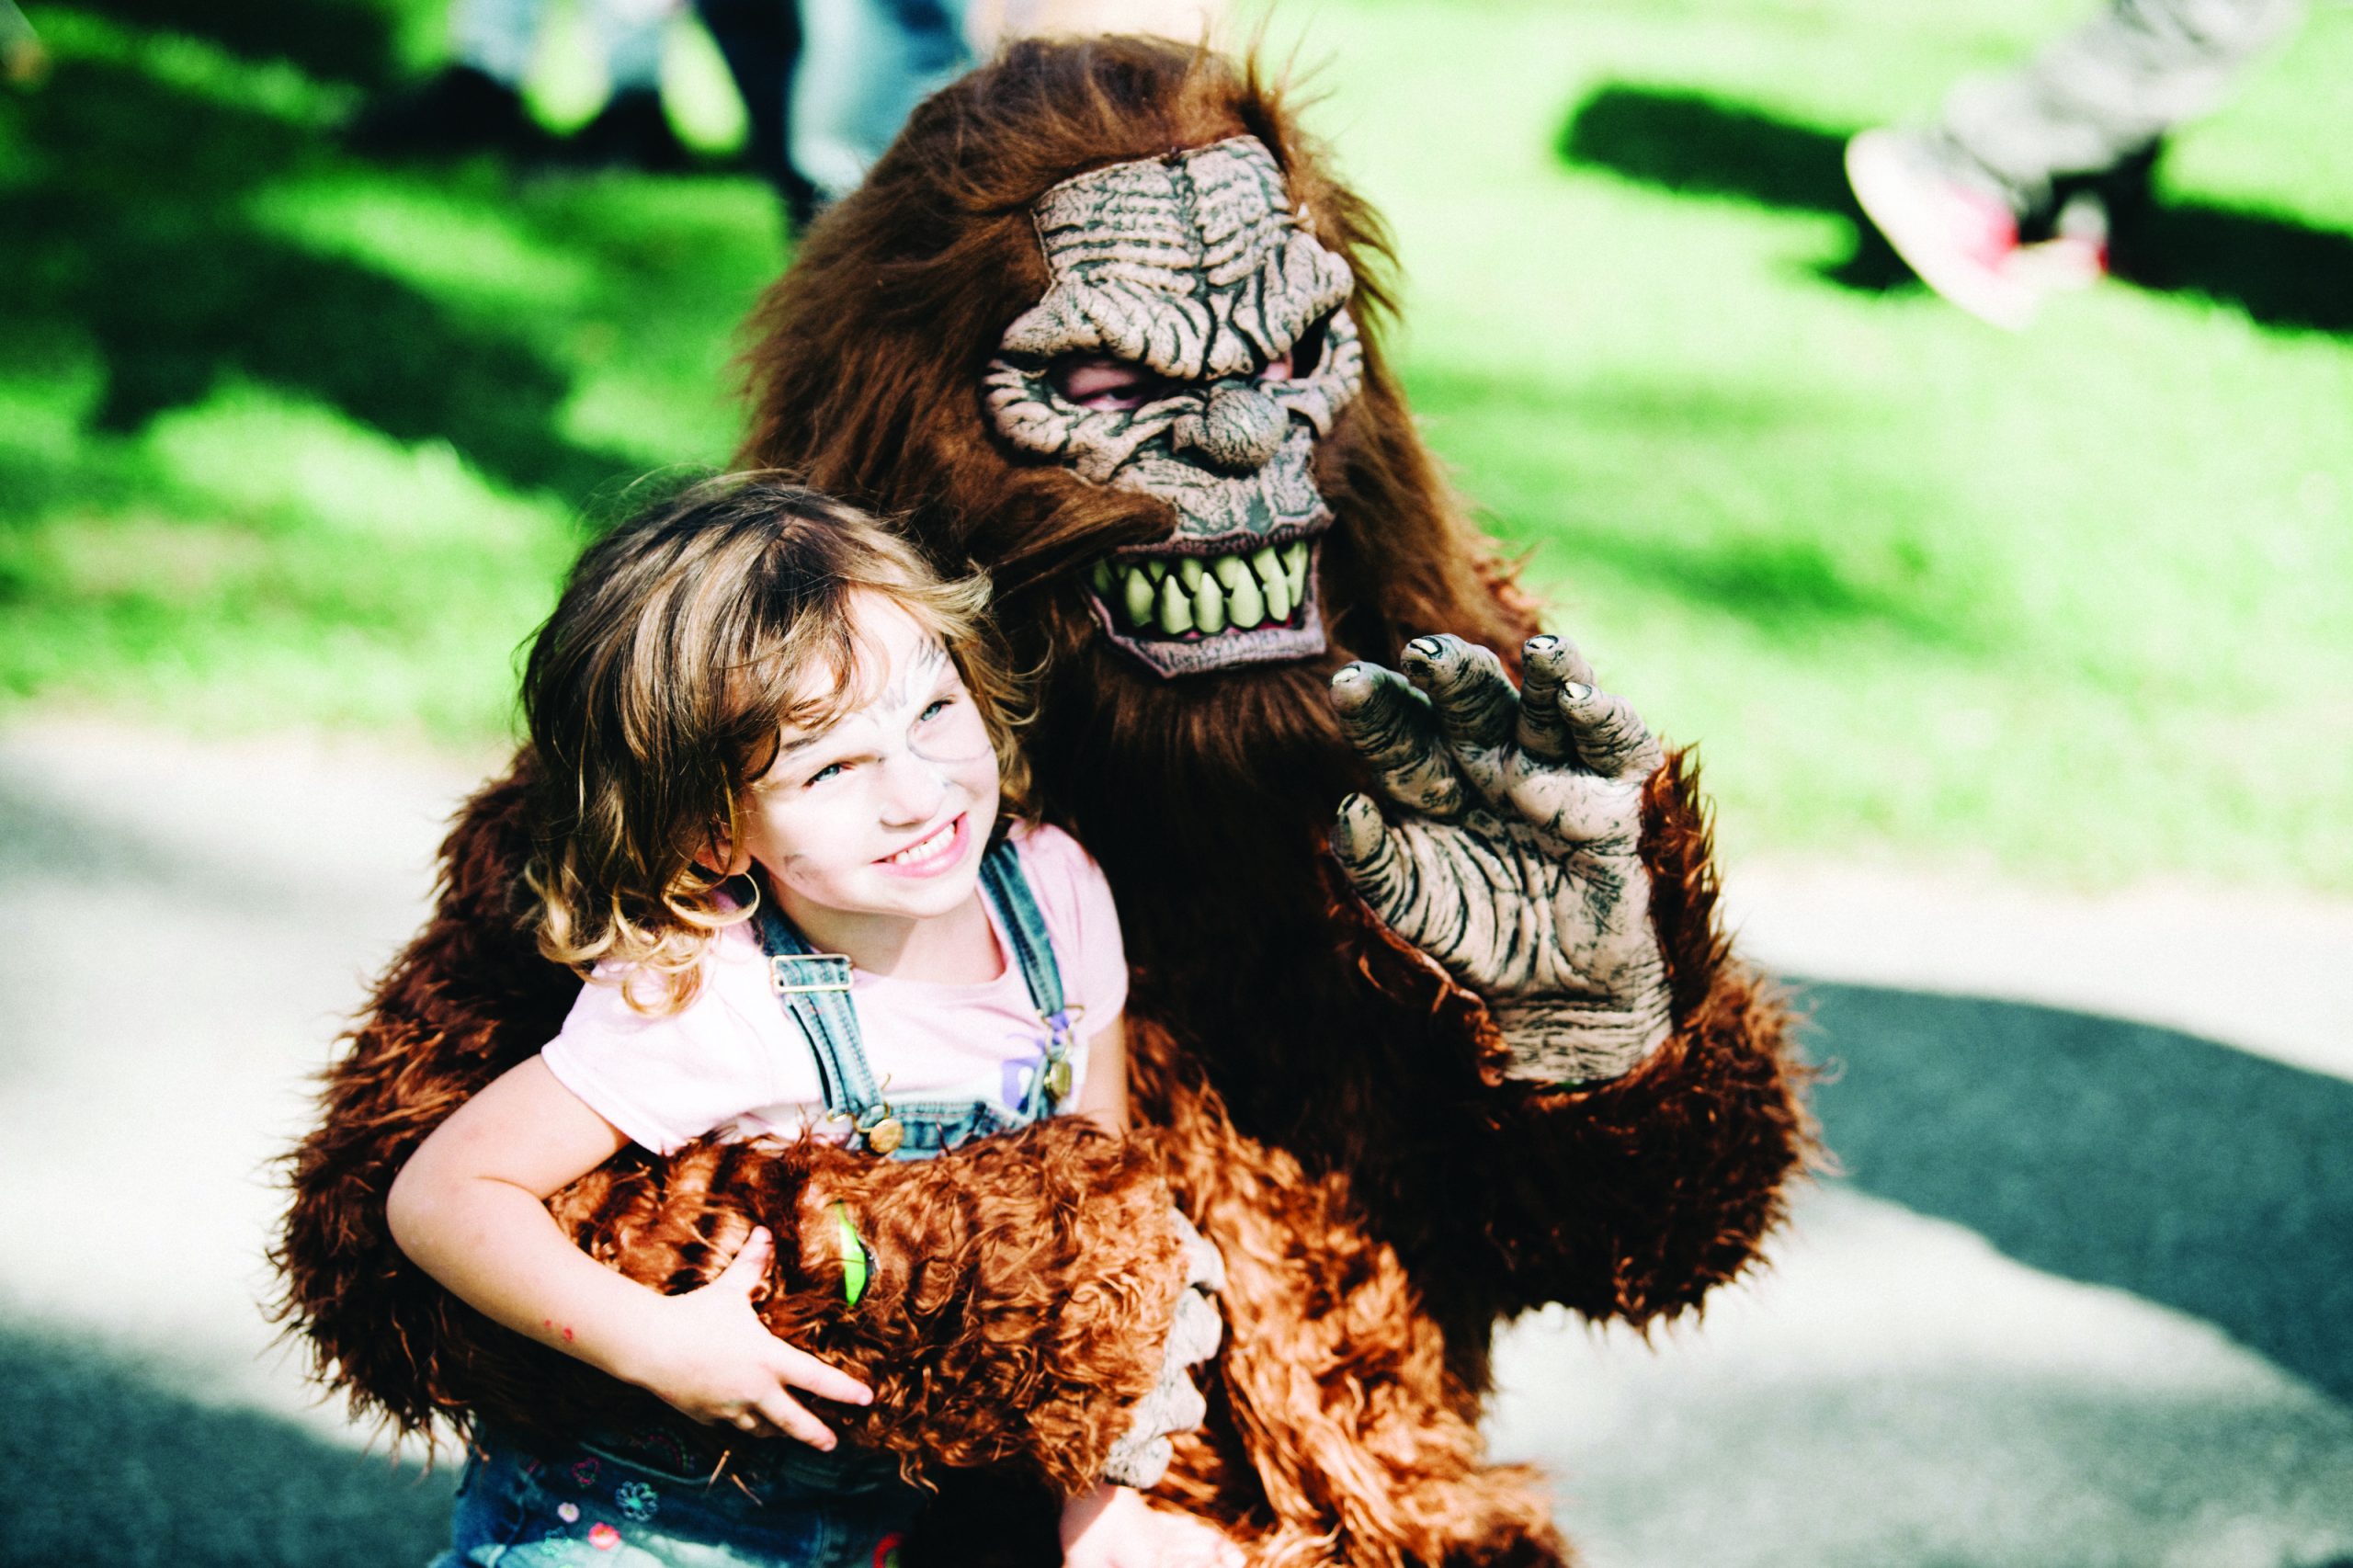 On the Hunt for Bigfoot at Sasquatch Festival, Culture